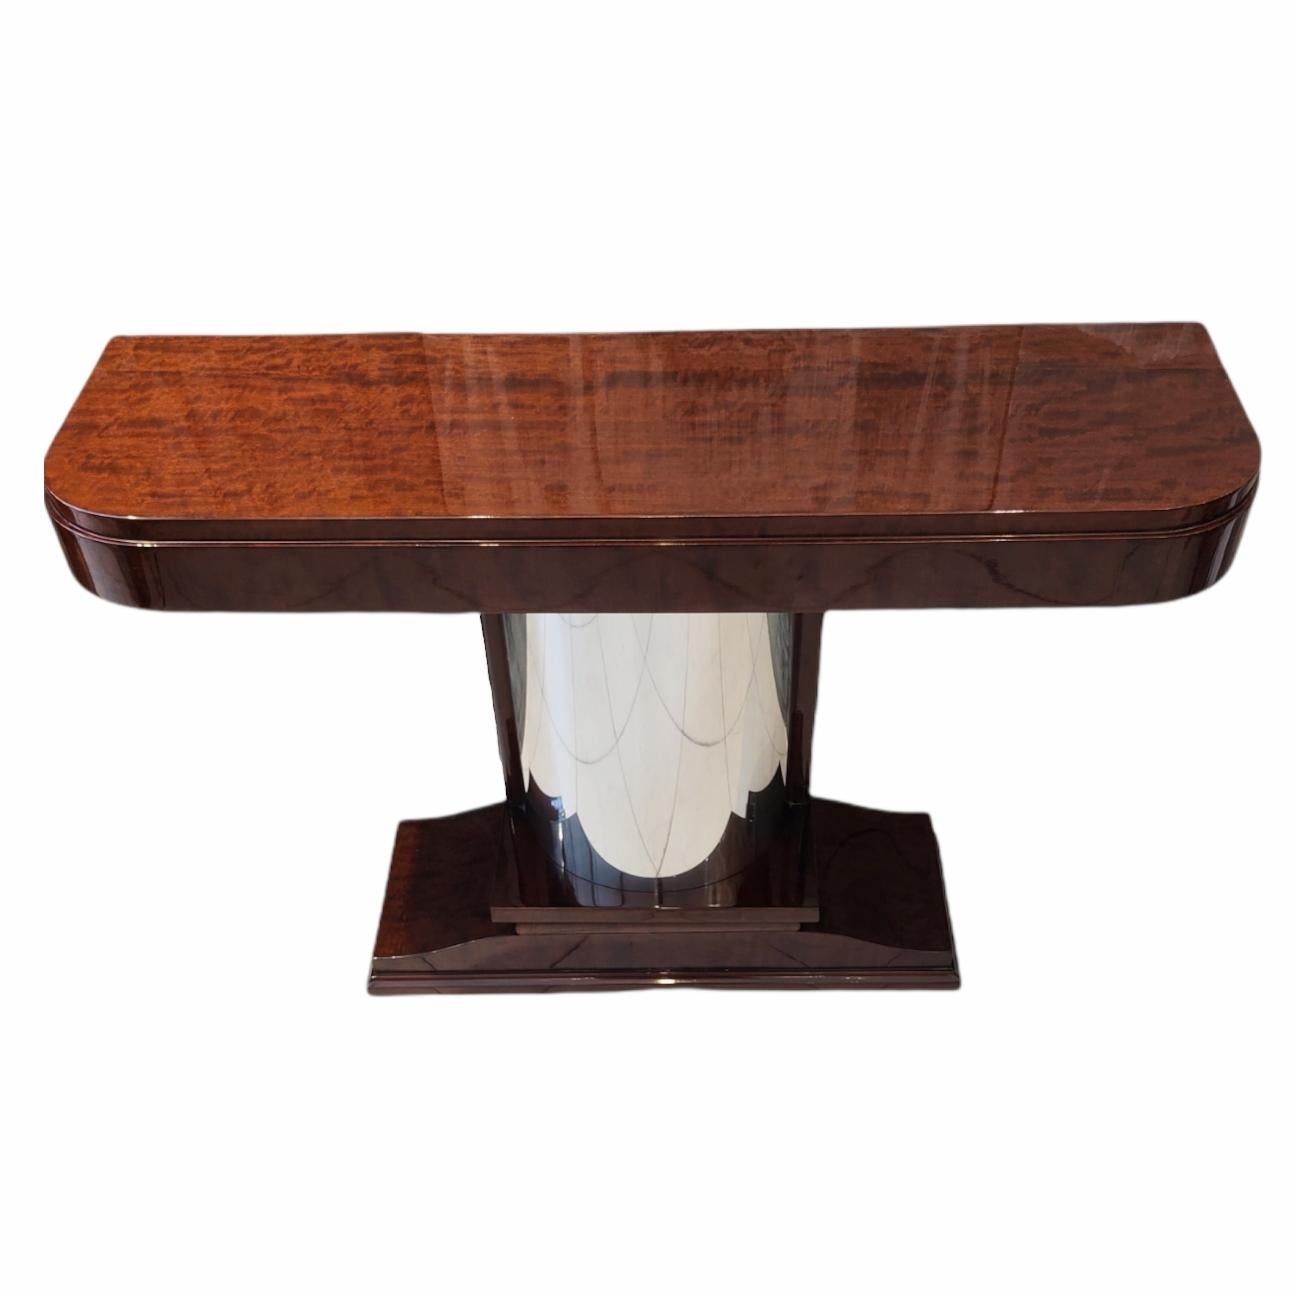 Excellent art deco period console, made of walnut and polished with polyurethane lacquer. the central column is in polished steel and gives the design a luxurious presence.

Art Deco, also called style moderne, movement in the decorative arts and